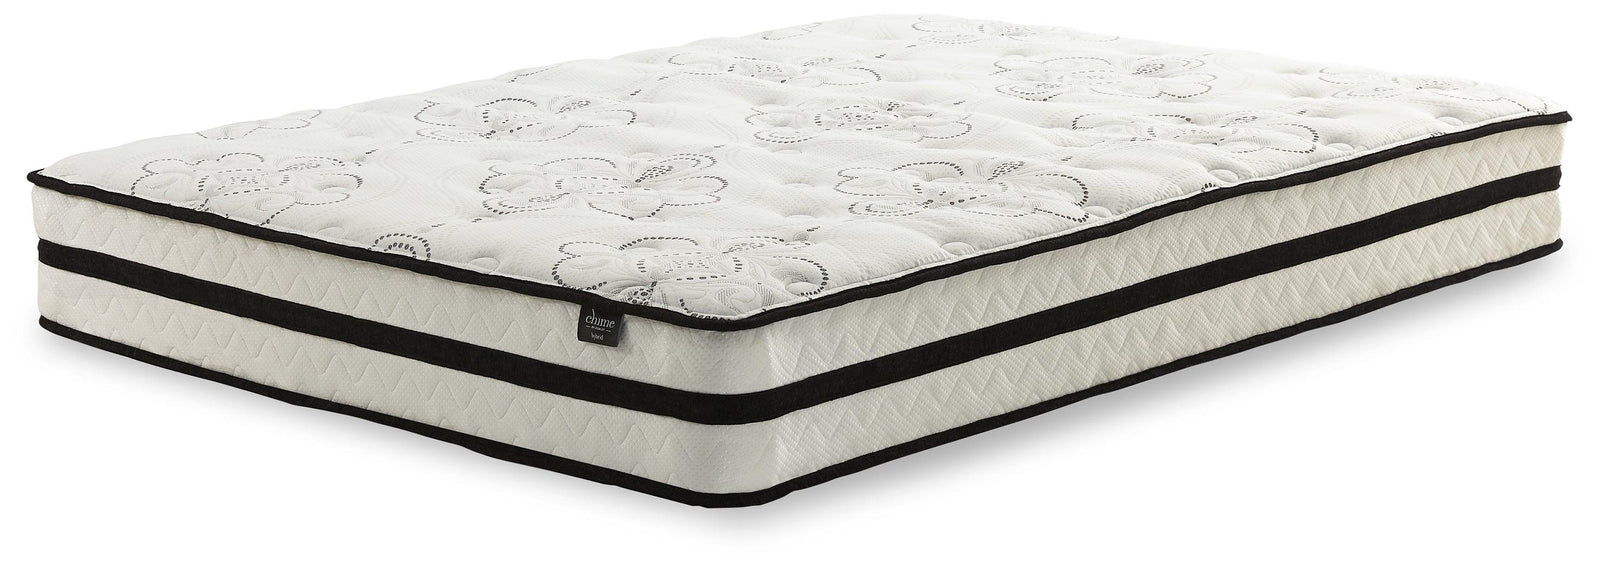 Chime 10 Inch Hybrid White Queen Mattress In A Box